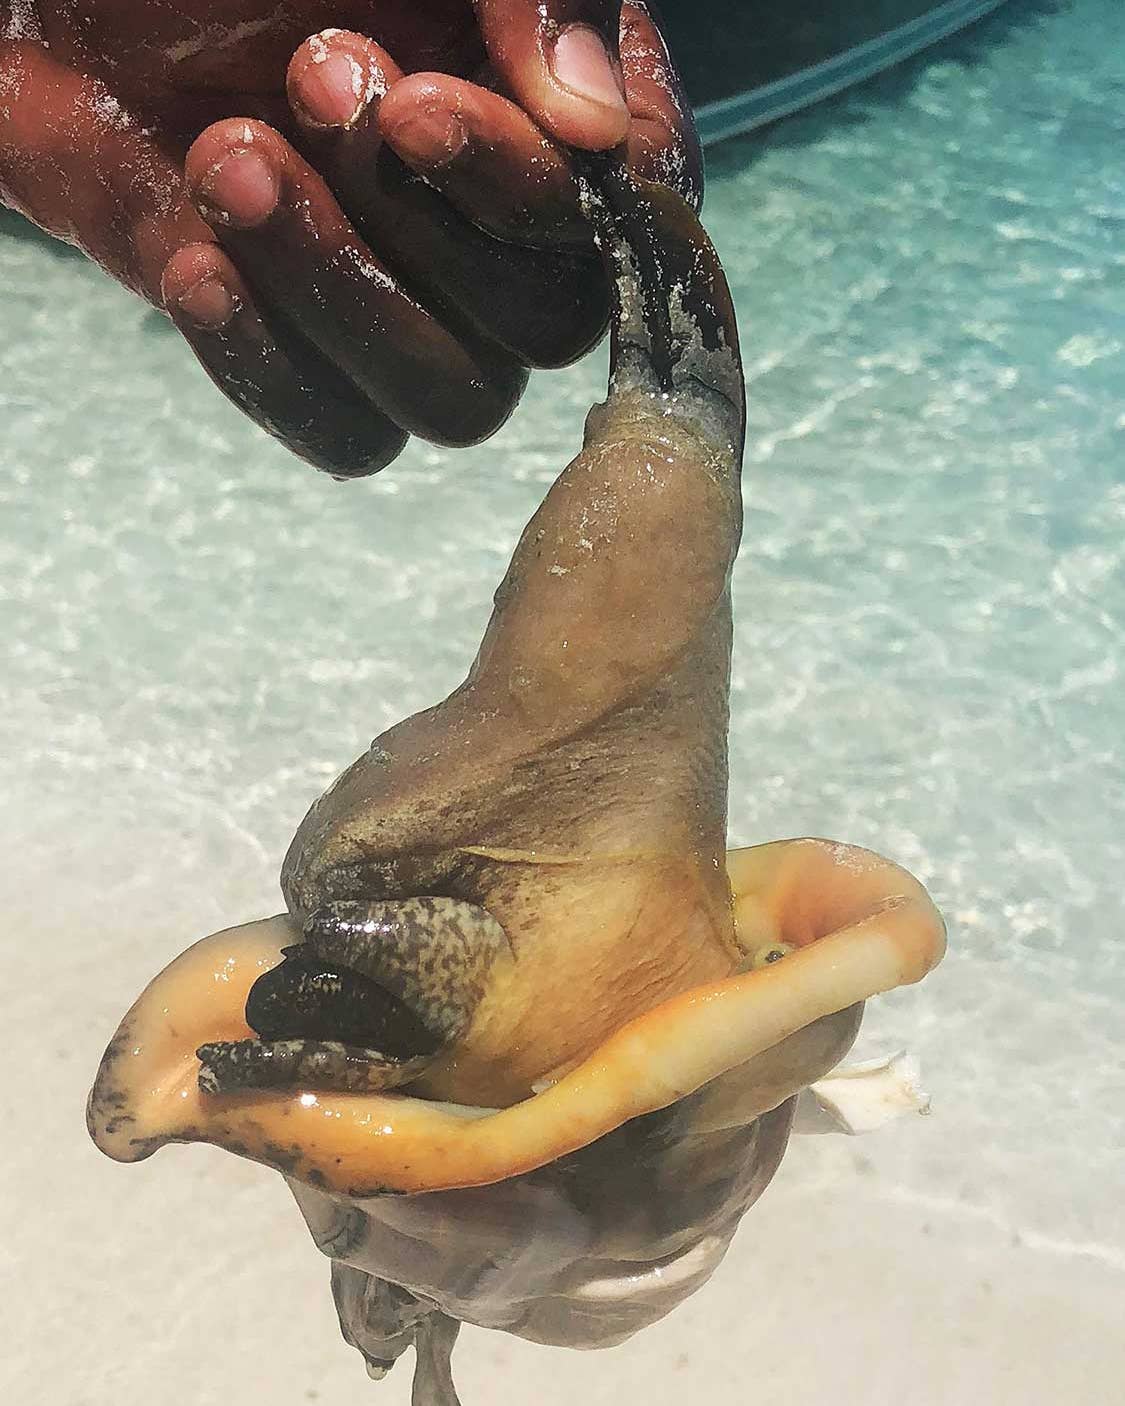 In Turks and Caicos, Conch Is Queen